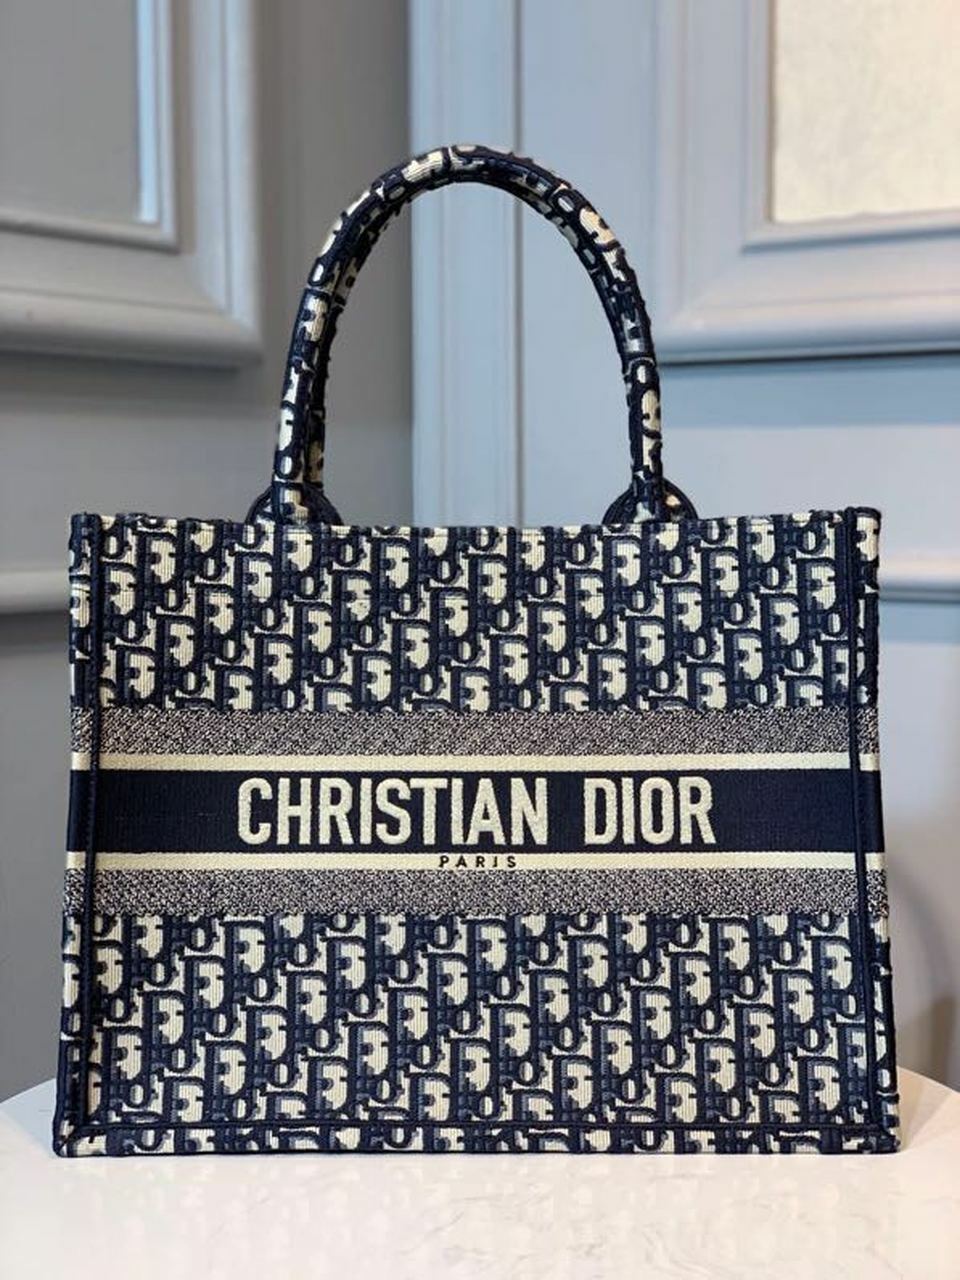 Christian Dior 02BO0065 Trotter Hand Bag Tote Bag CanvasLeather Navy   eBay